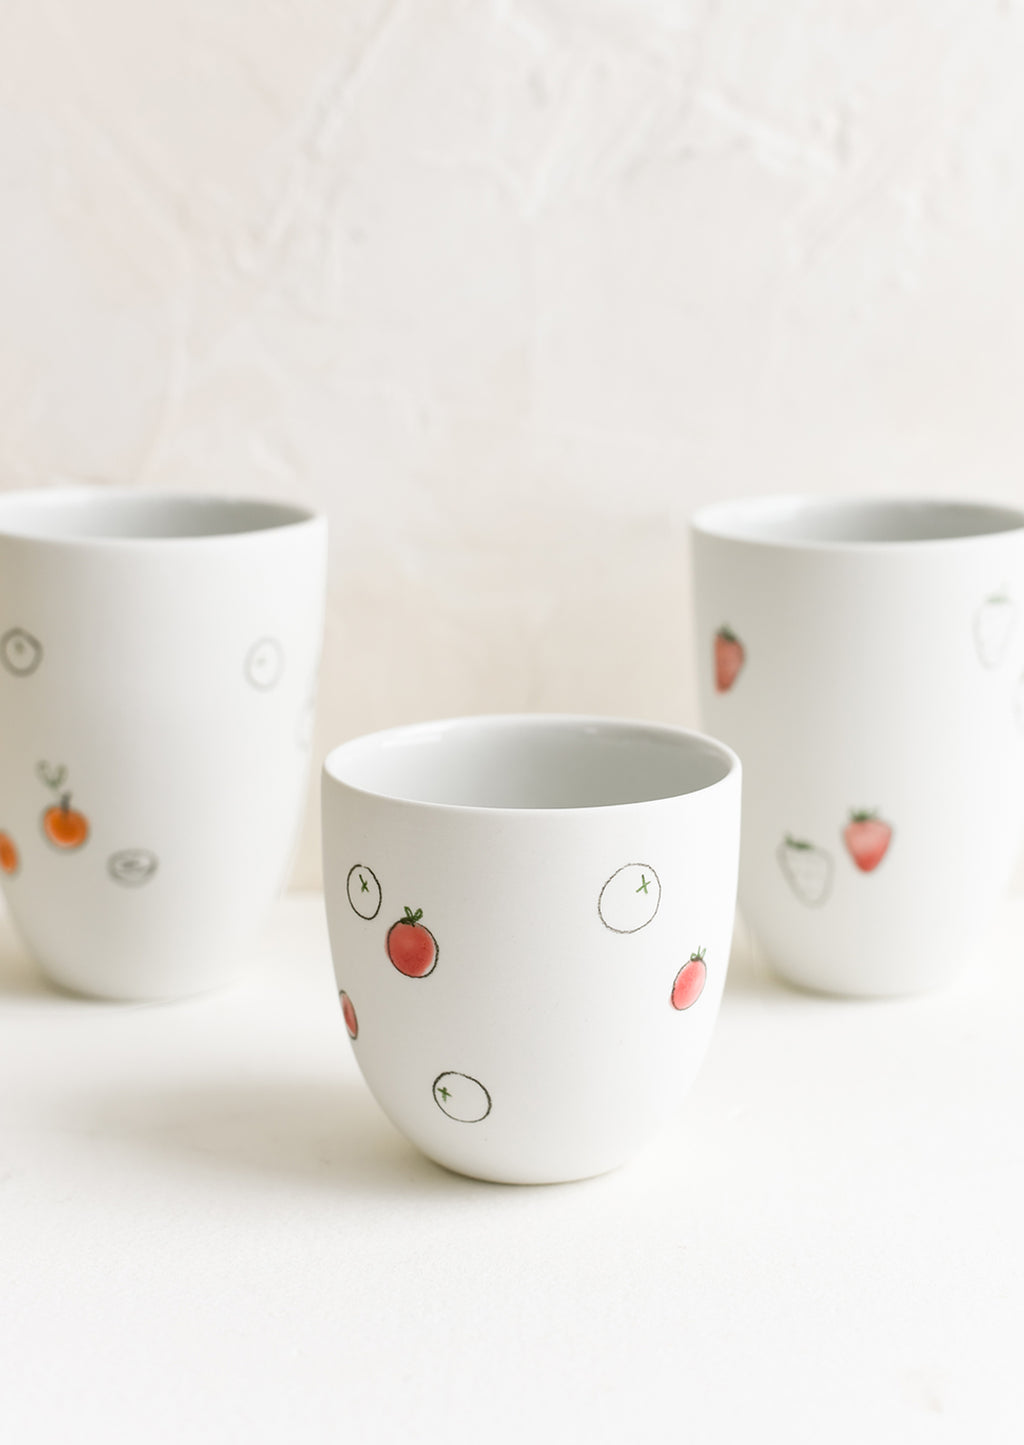 1: Small and large porcelain cups with hand drawn fruit sketches.